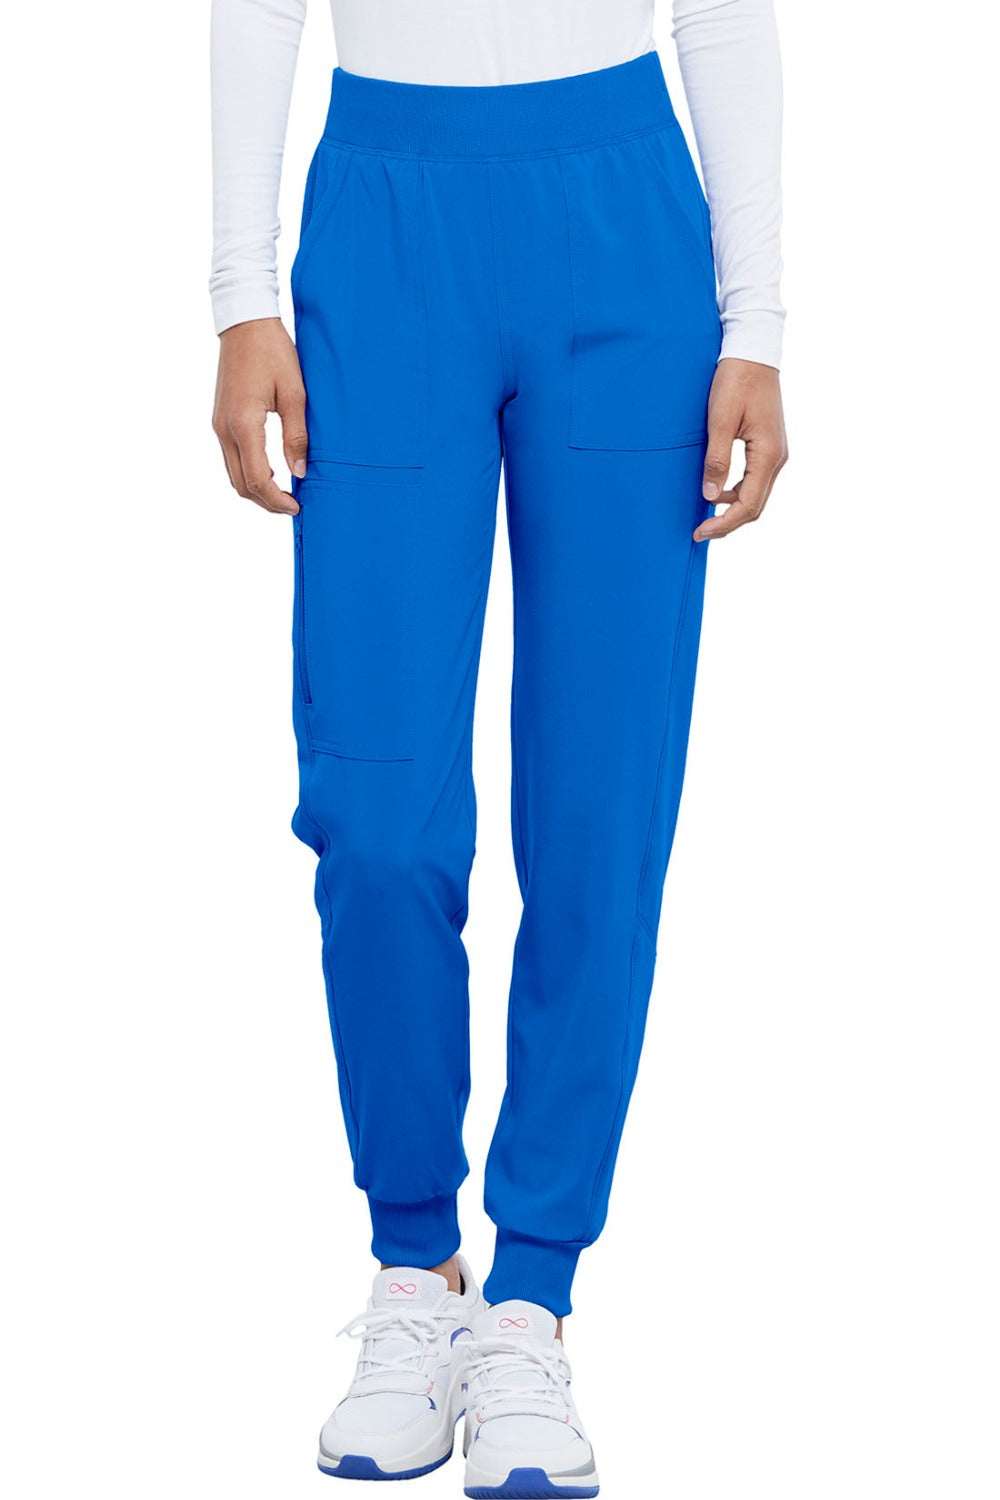 Cherokee Allura Scrub Pant Pull On Jogger in Royal at Parker's Clothing and Shoes.